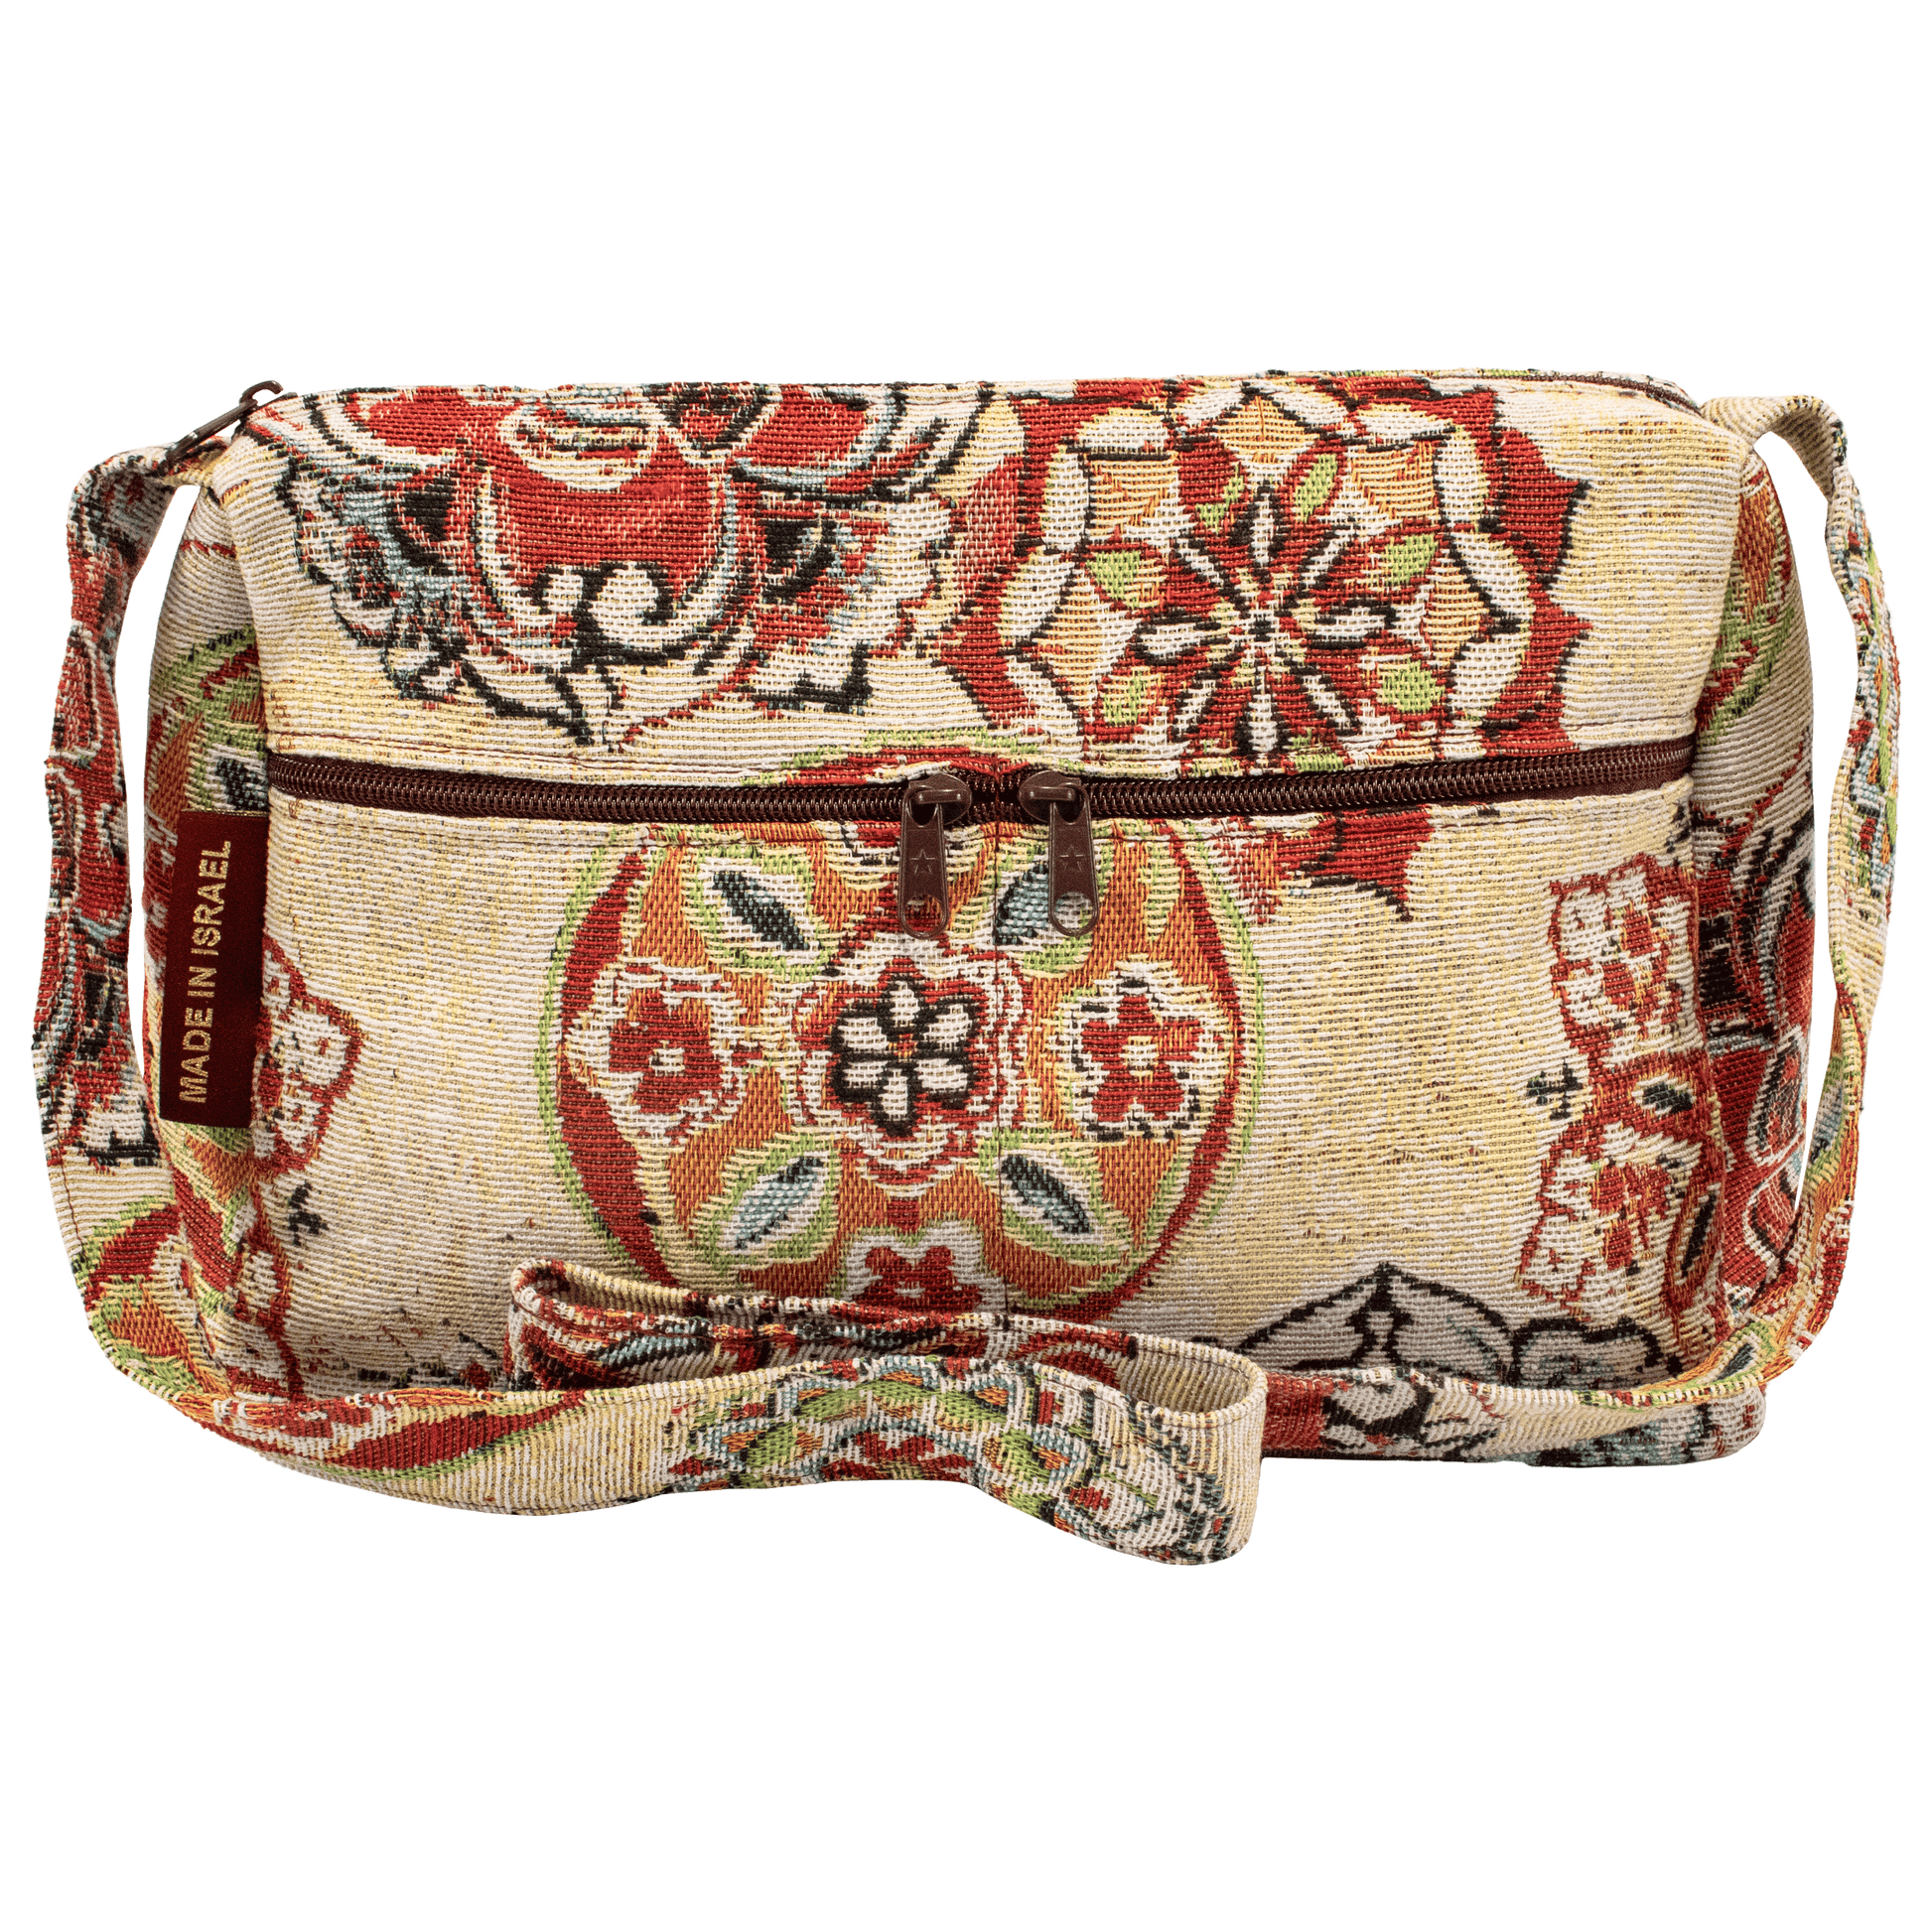 Large crossbody or shoulder bag with red and earthy toned floral pattern